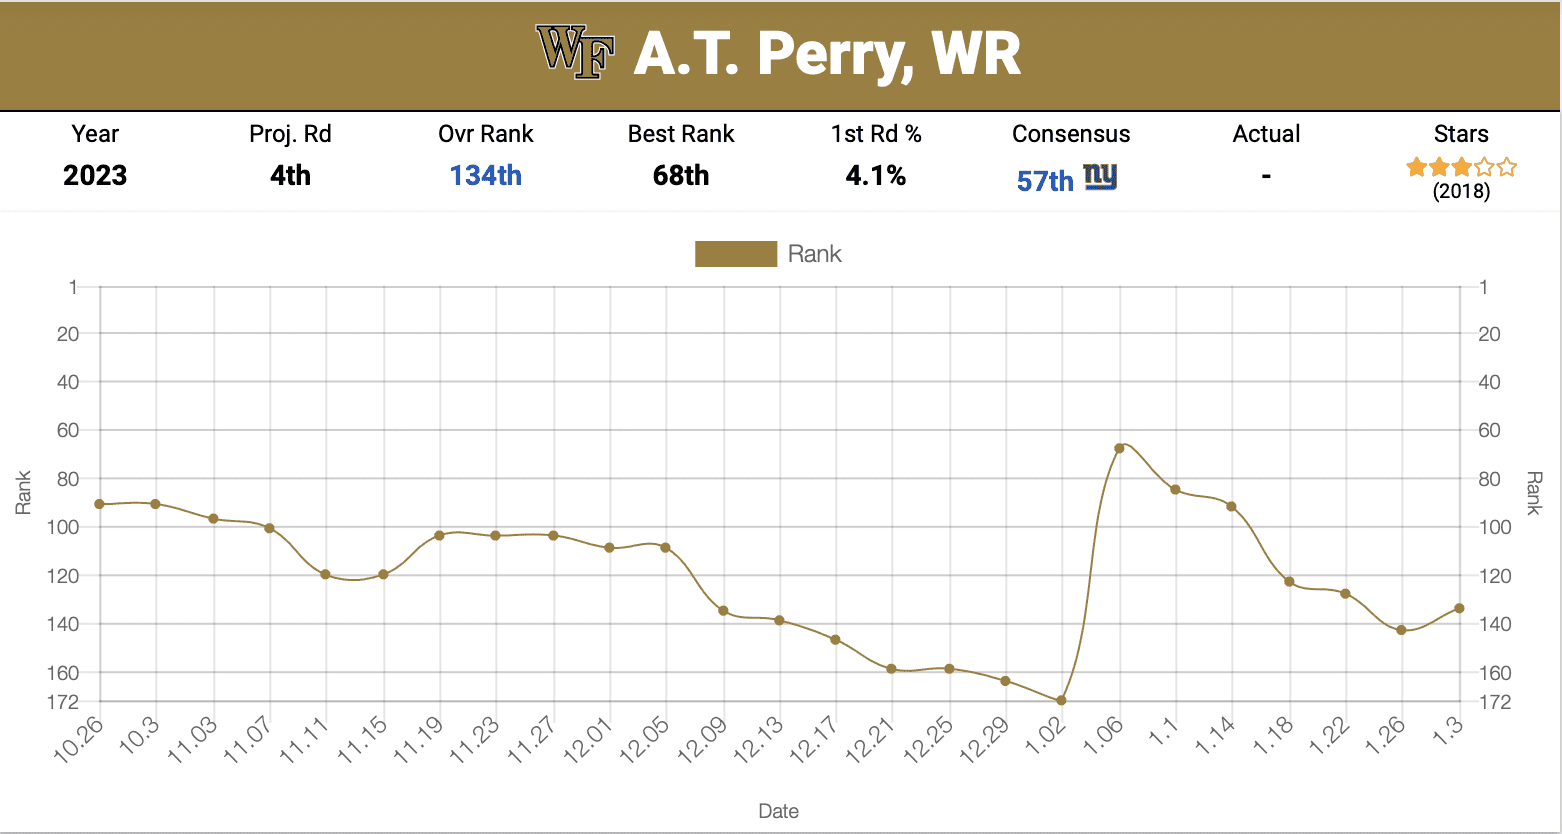 Steelers A.T. Perry